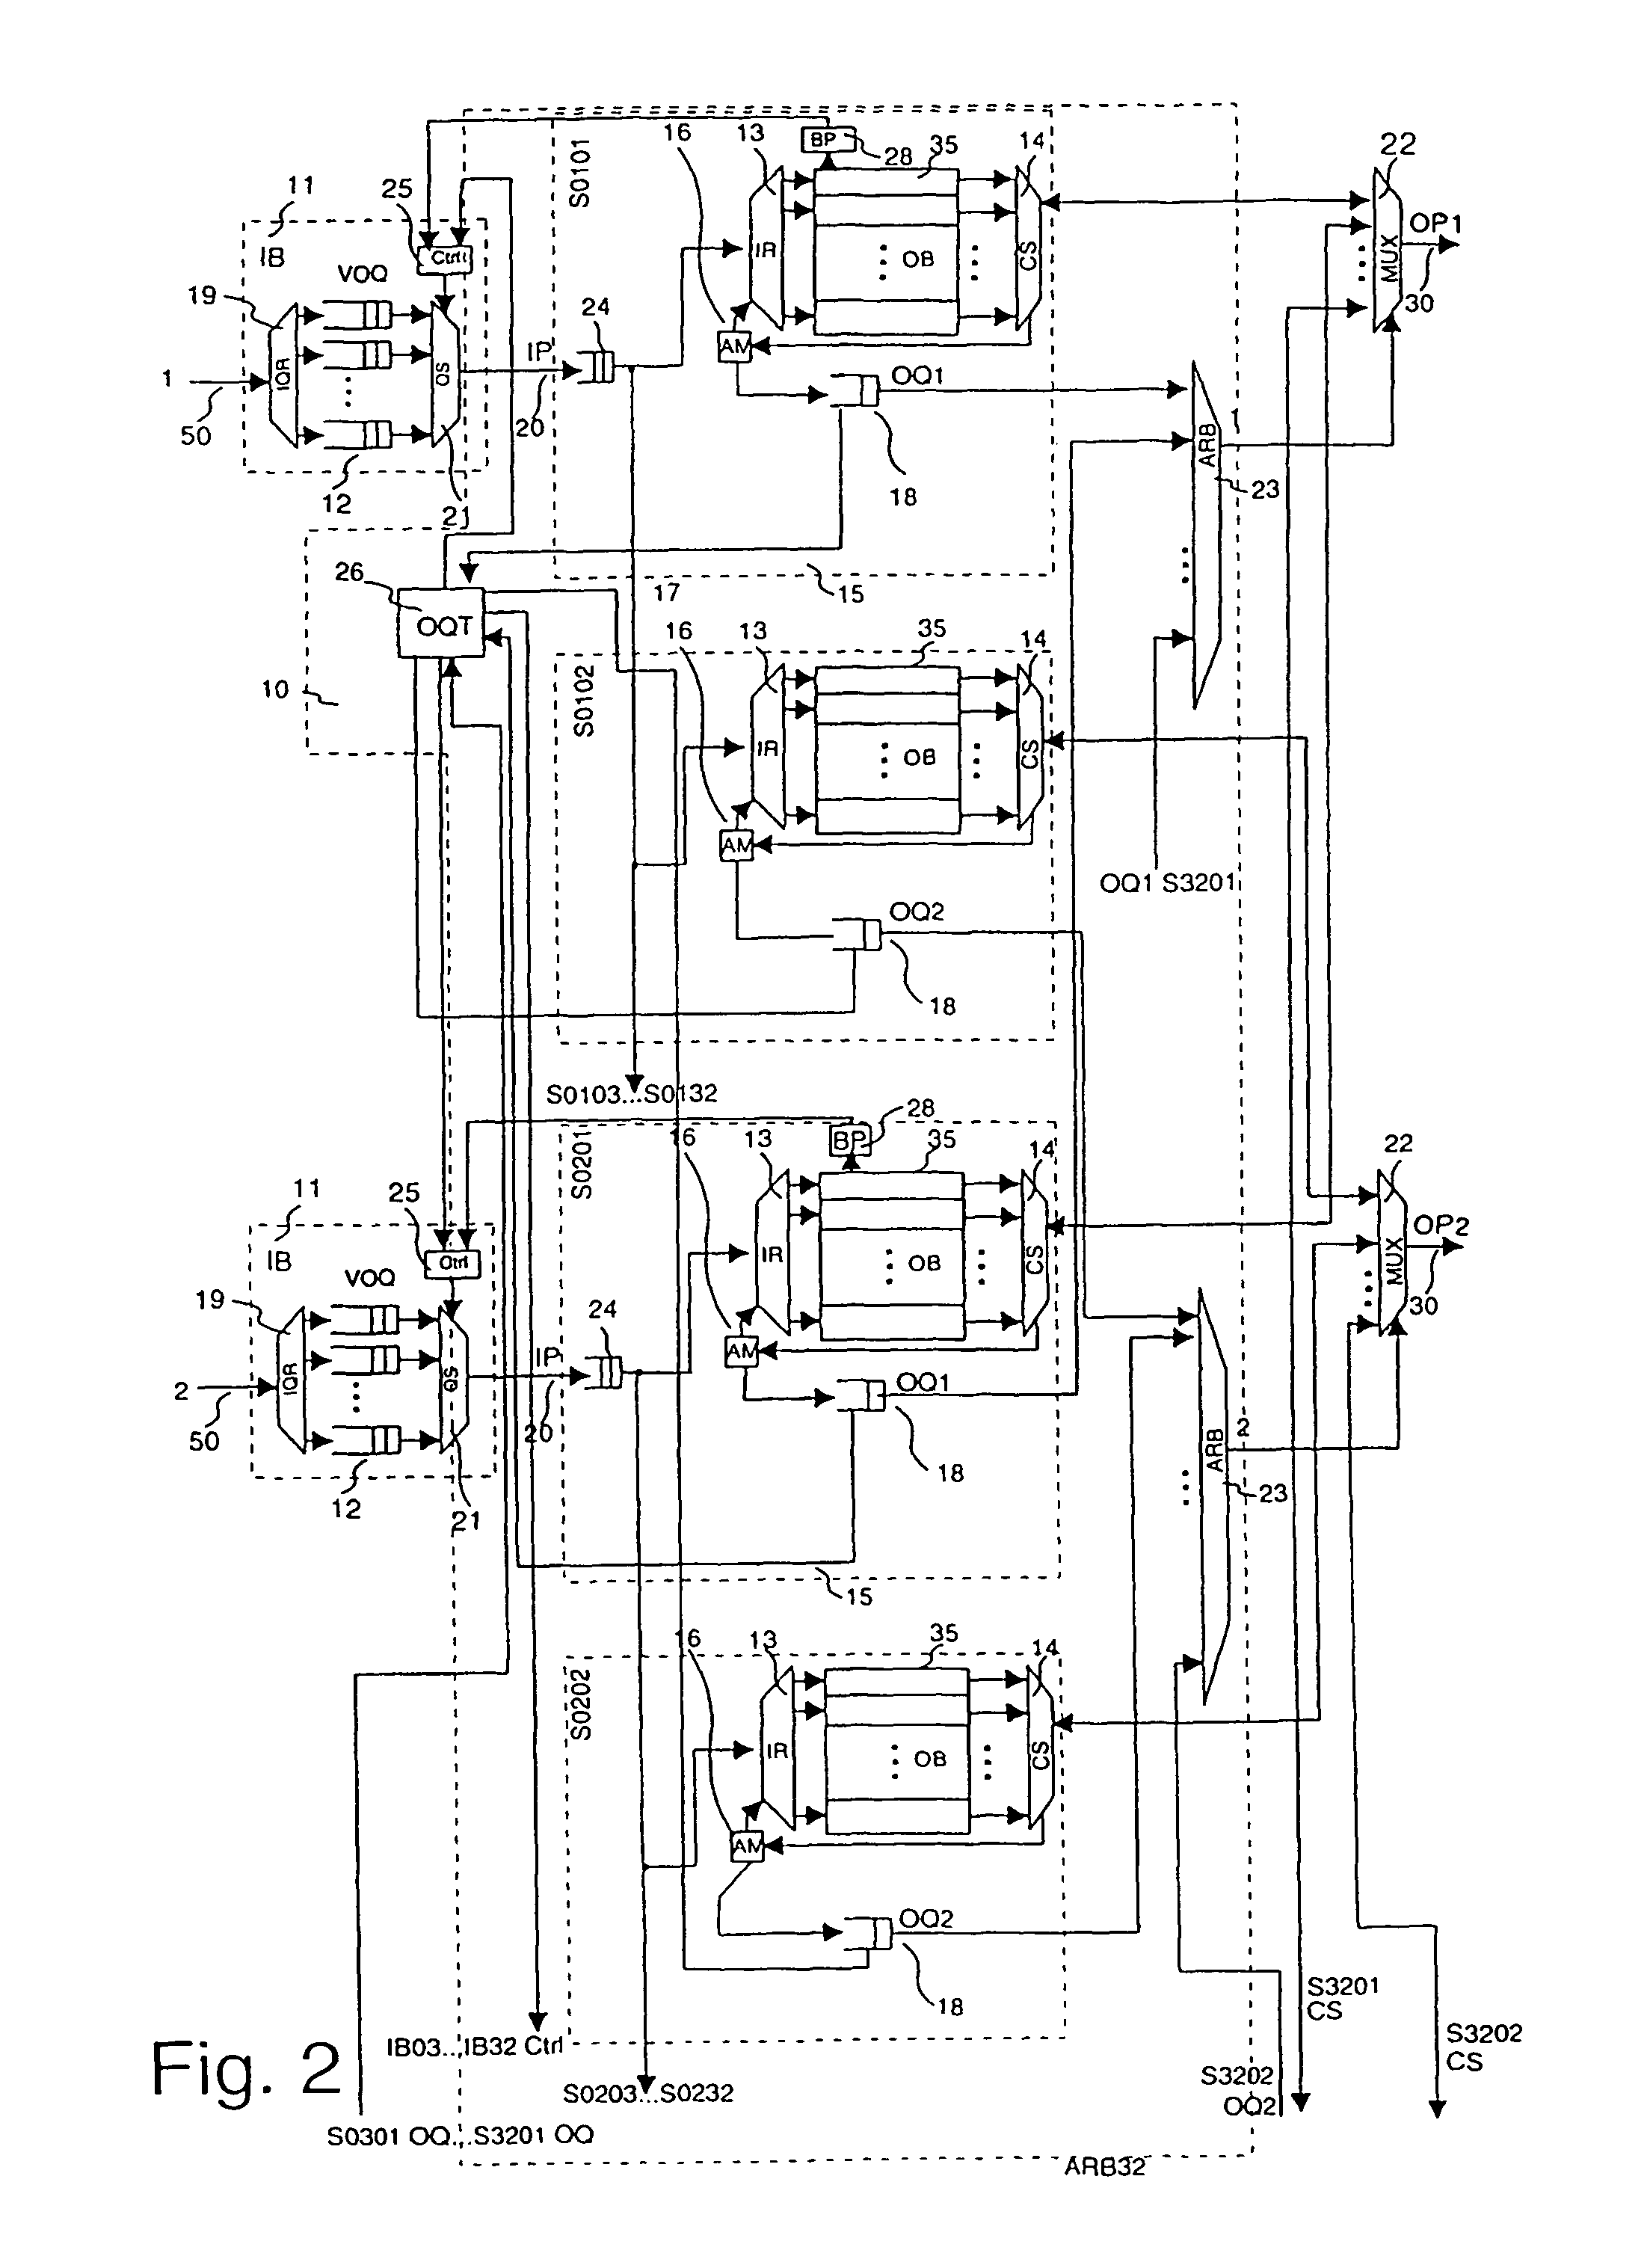 Switching arrangement and method with separated output buffers